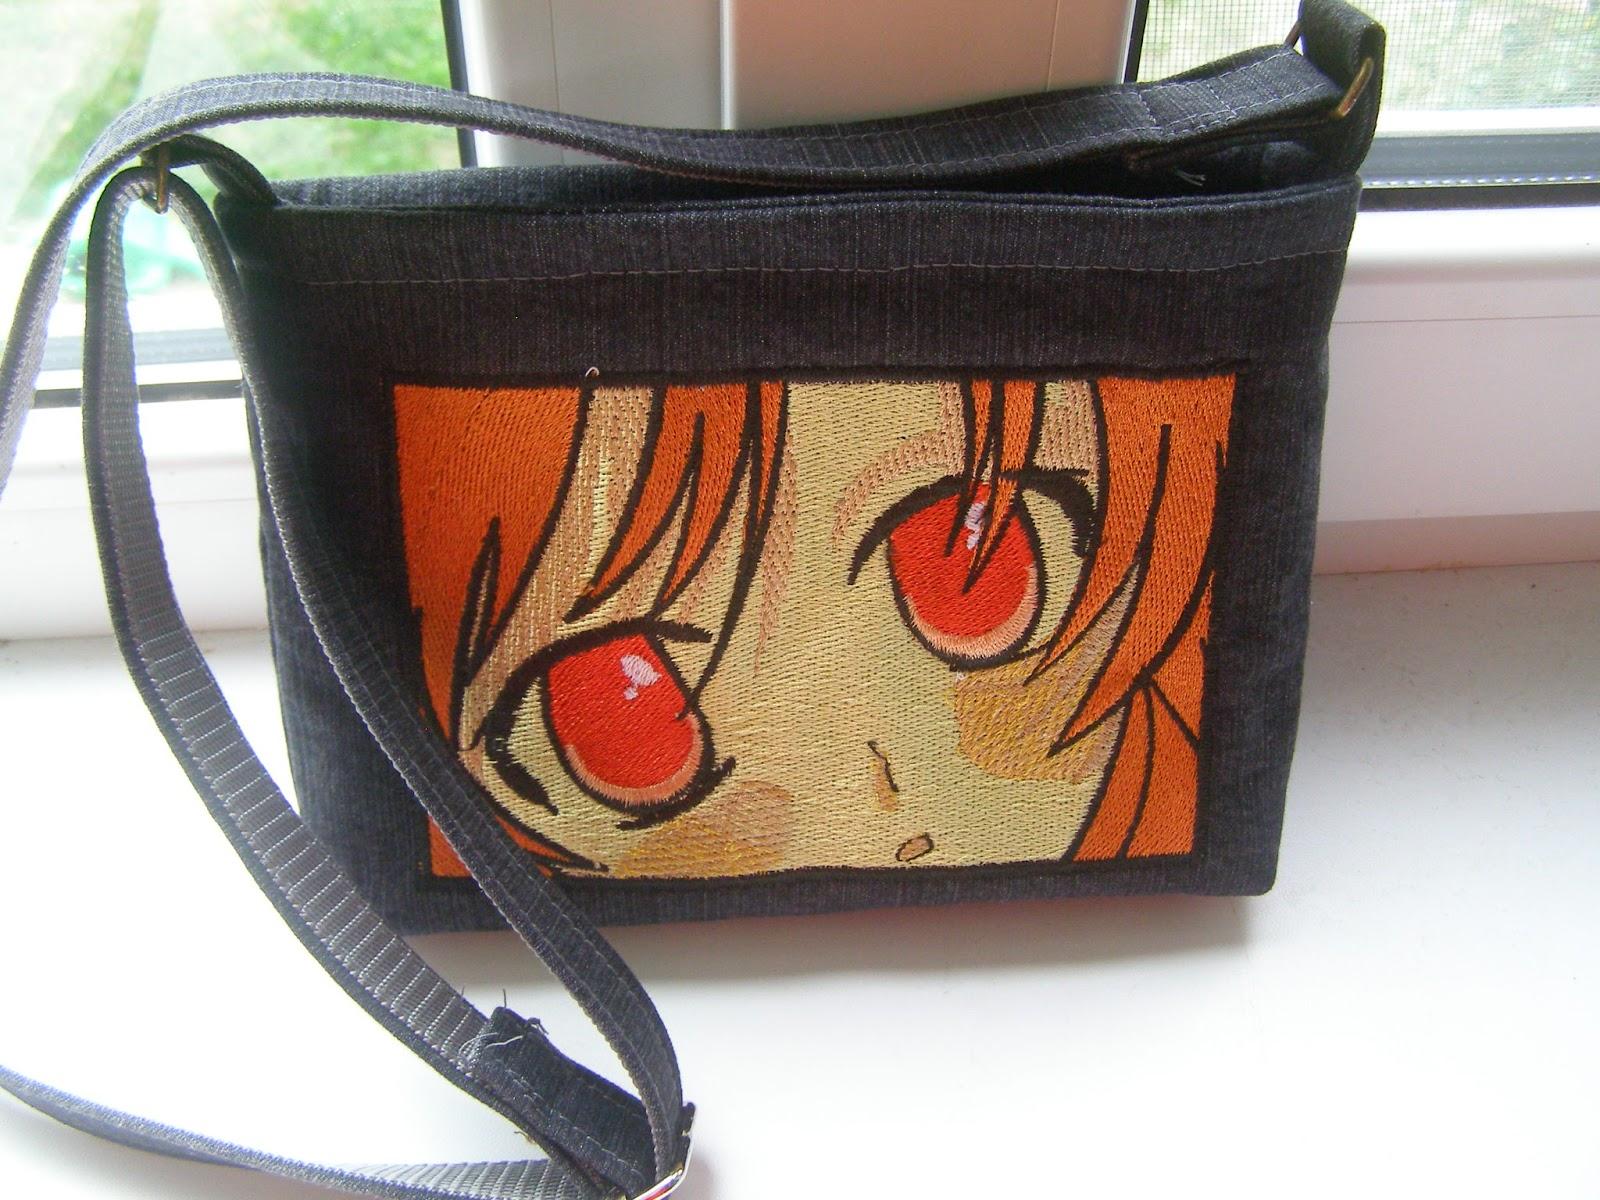 Embroidered bag with Anime eyes design